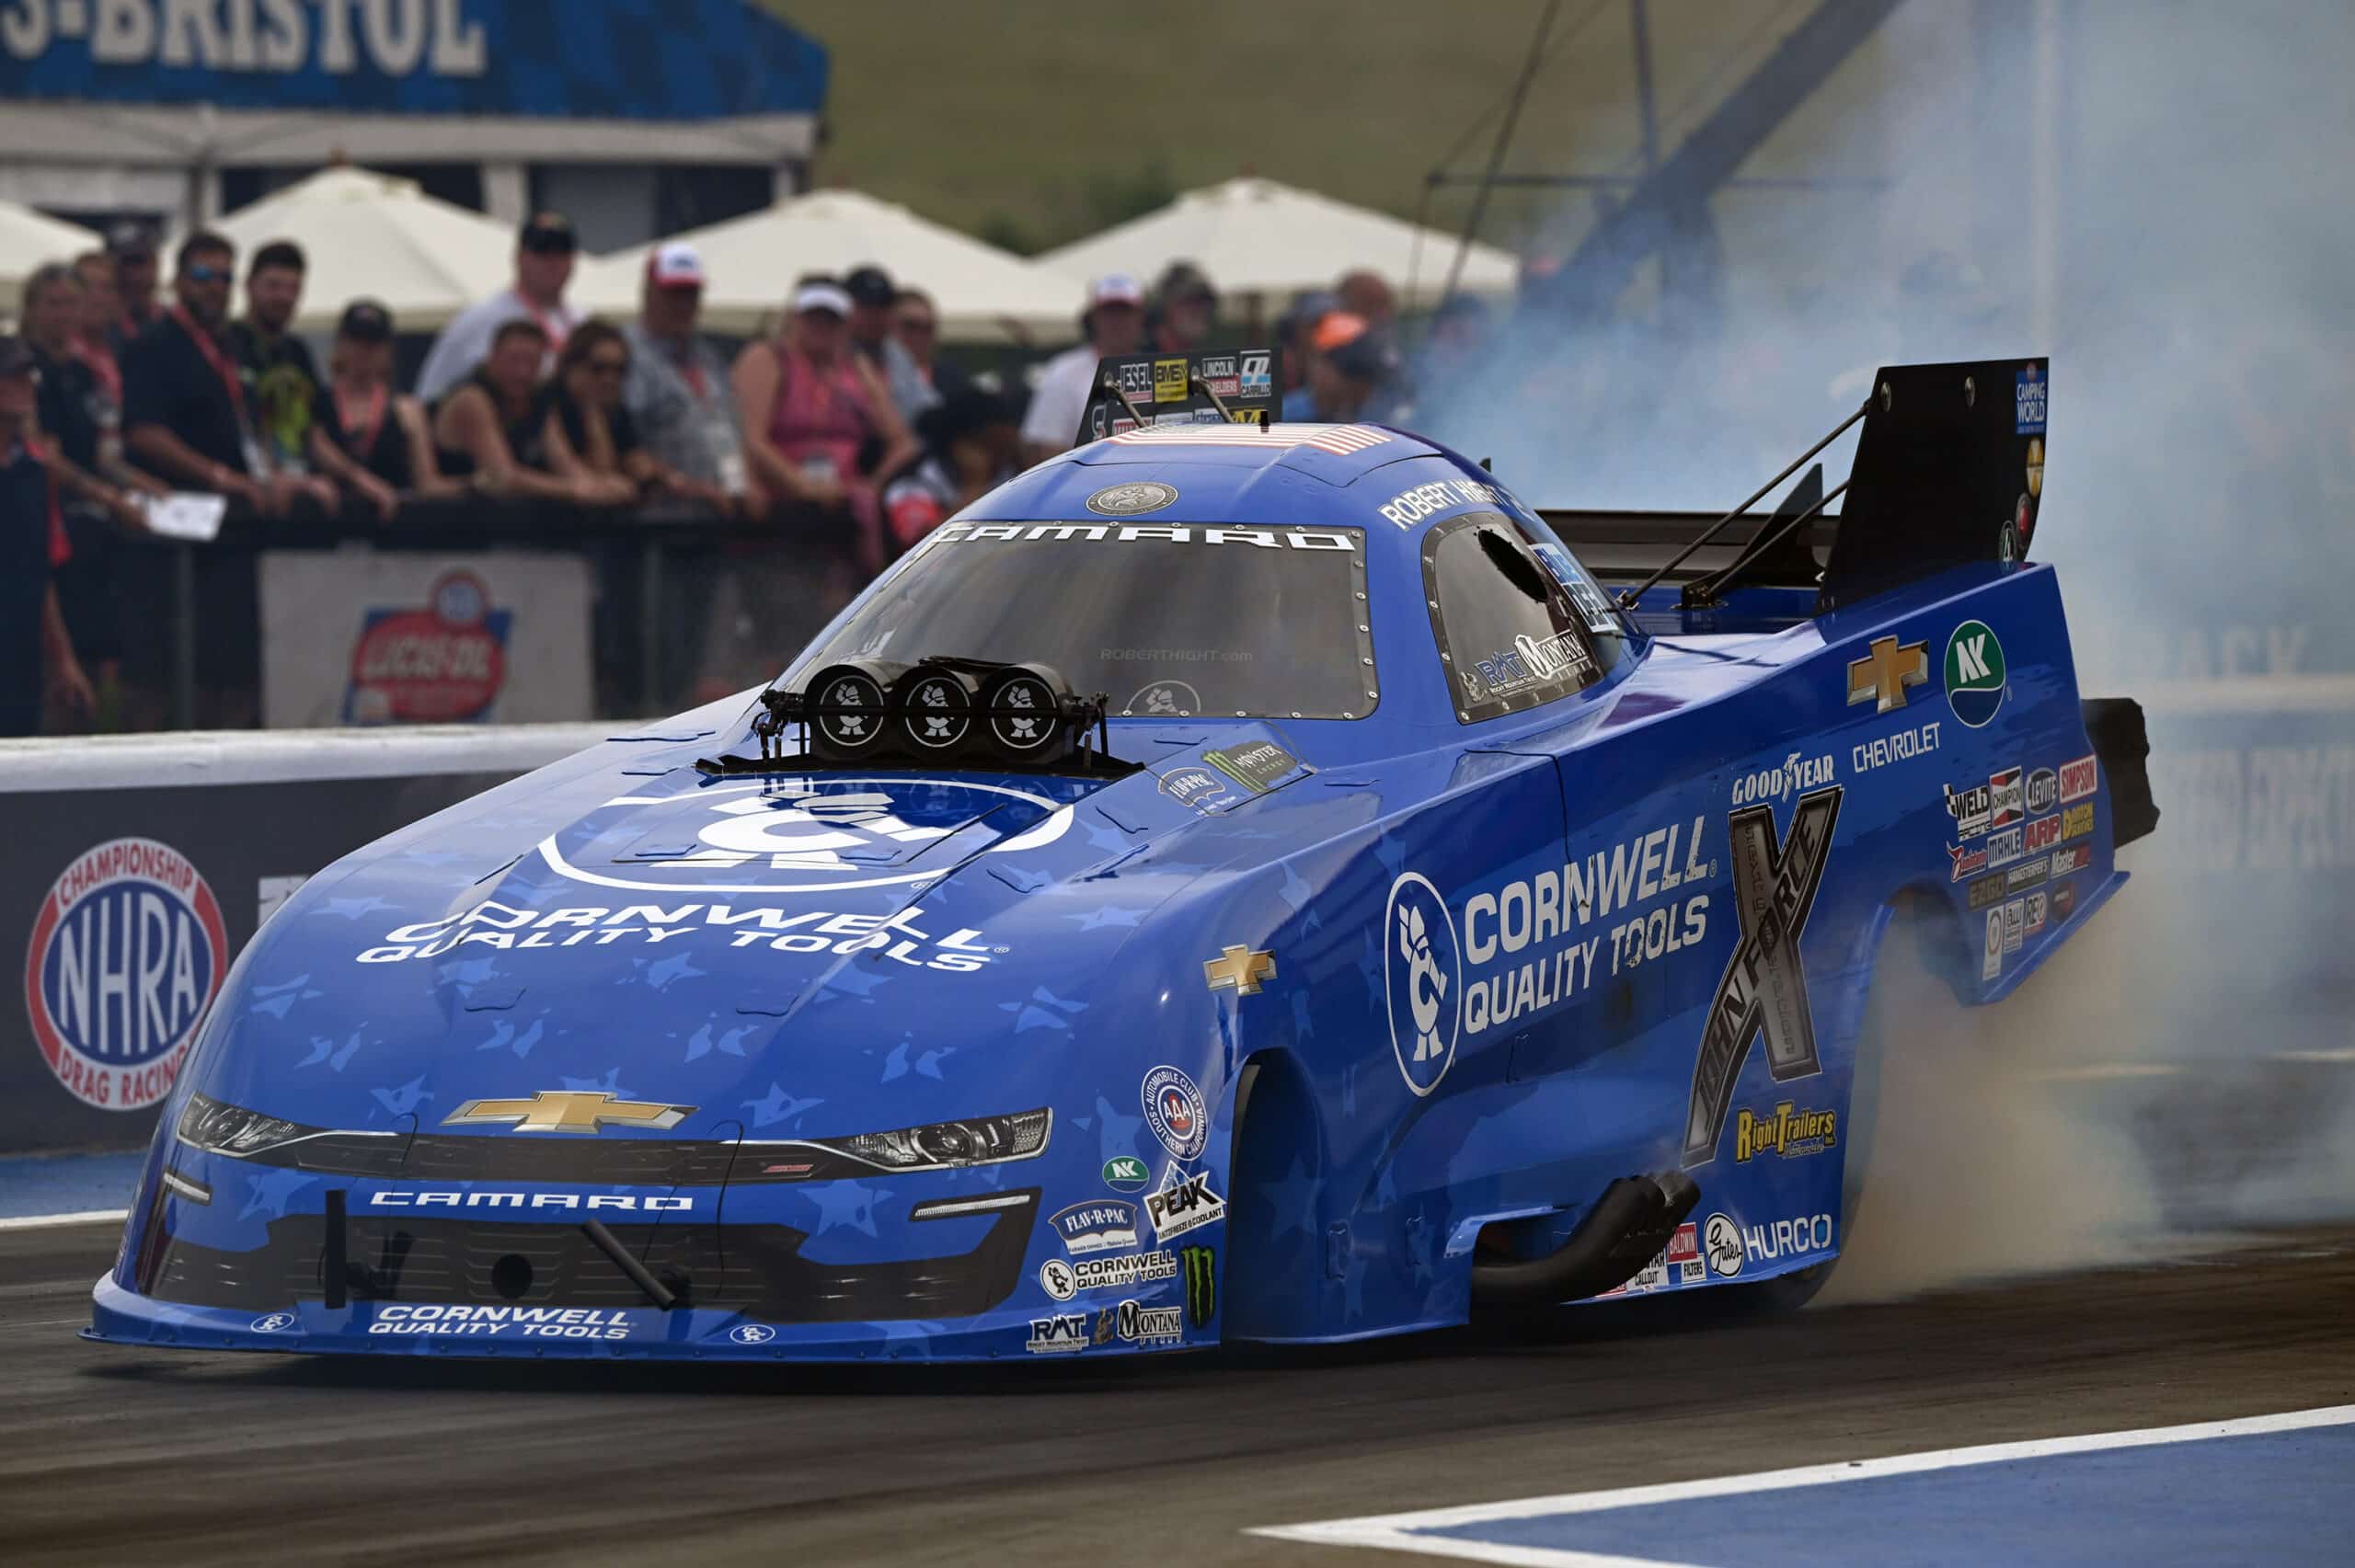 ROBERT HIGHT AND CORNWELL TOOLS HOPE TO CLOSE BANDIMERE RACEWAY WITH  CONSECUTIVE VICTORIES - John Force Racing